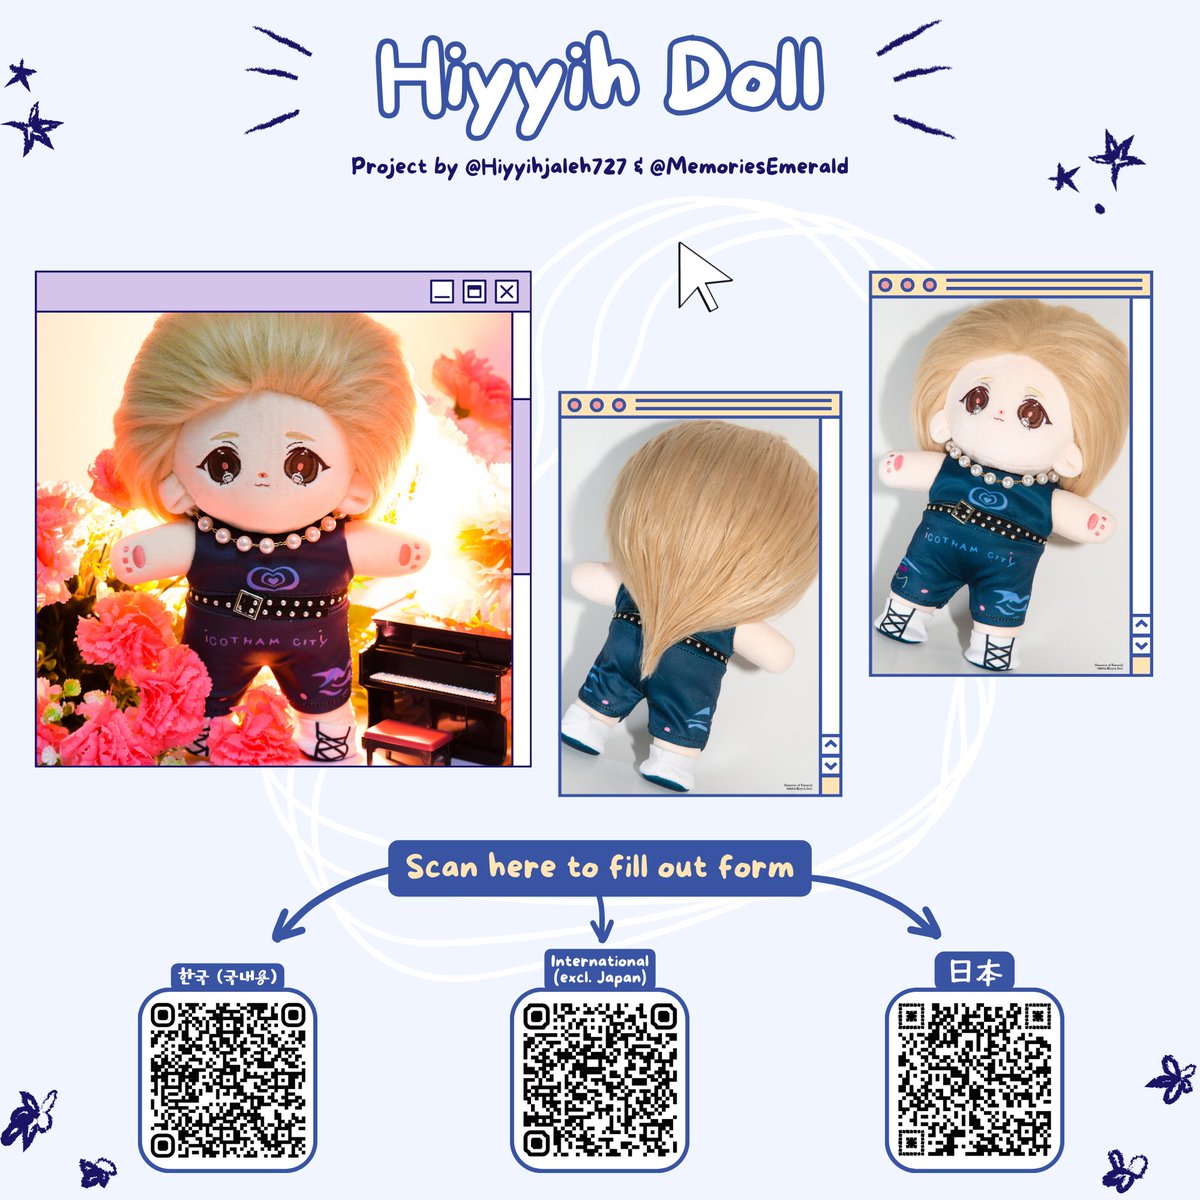 Hi everyone! @MemoriesEmerald and I made an announcement not too long ago about the new Hiyyih doll. I wanted to say for those who didn't get the previous doll. This would be your chance to get this doll. If you're interested please scan the picture for the forms. Thank you!